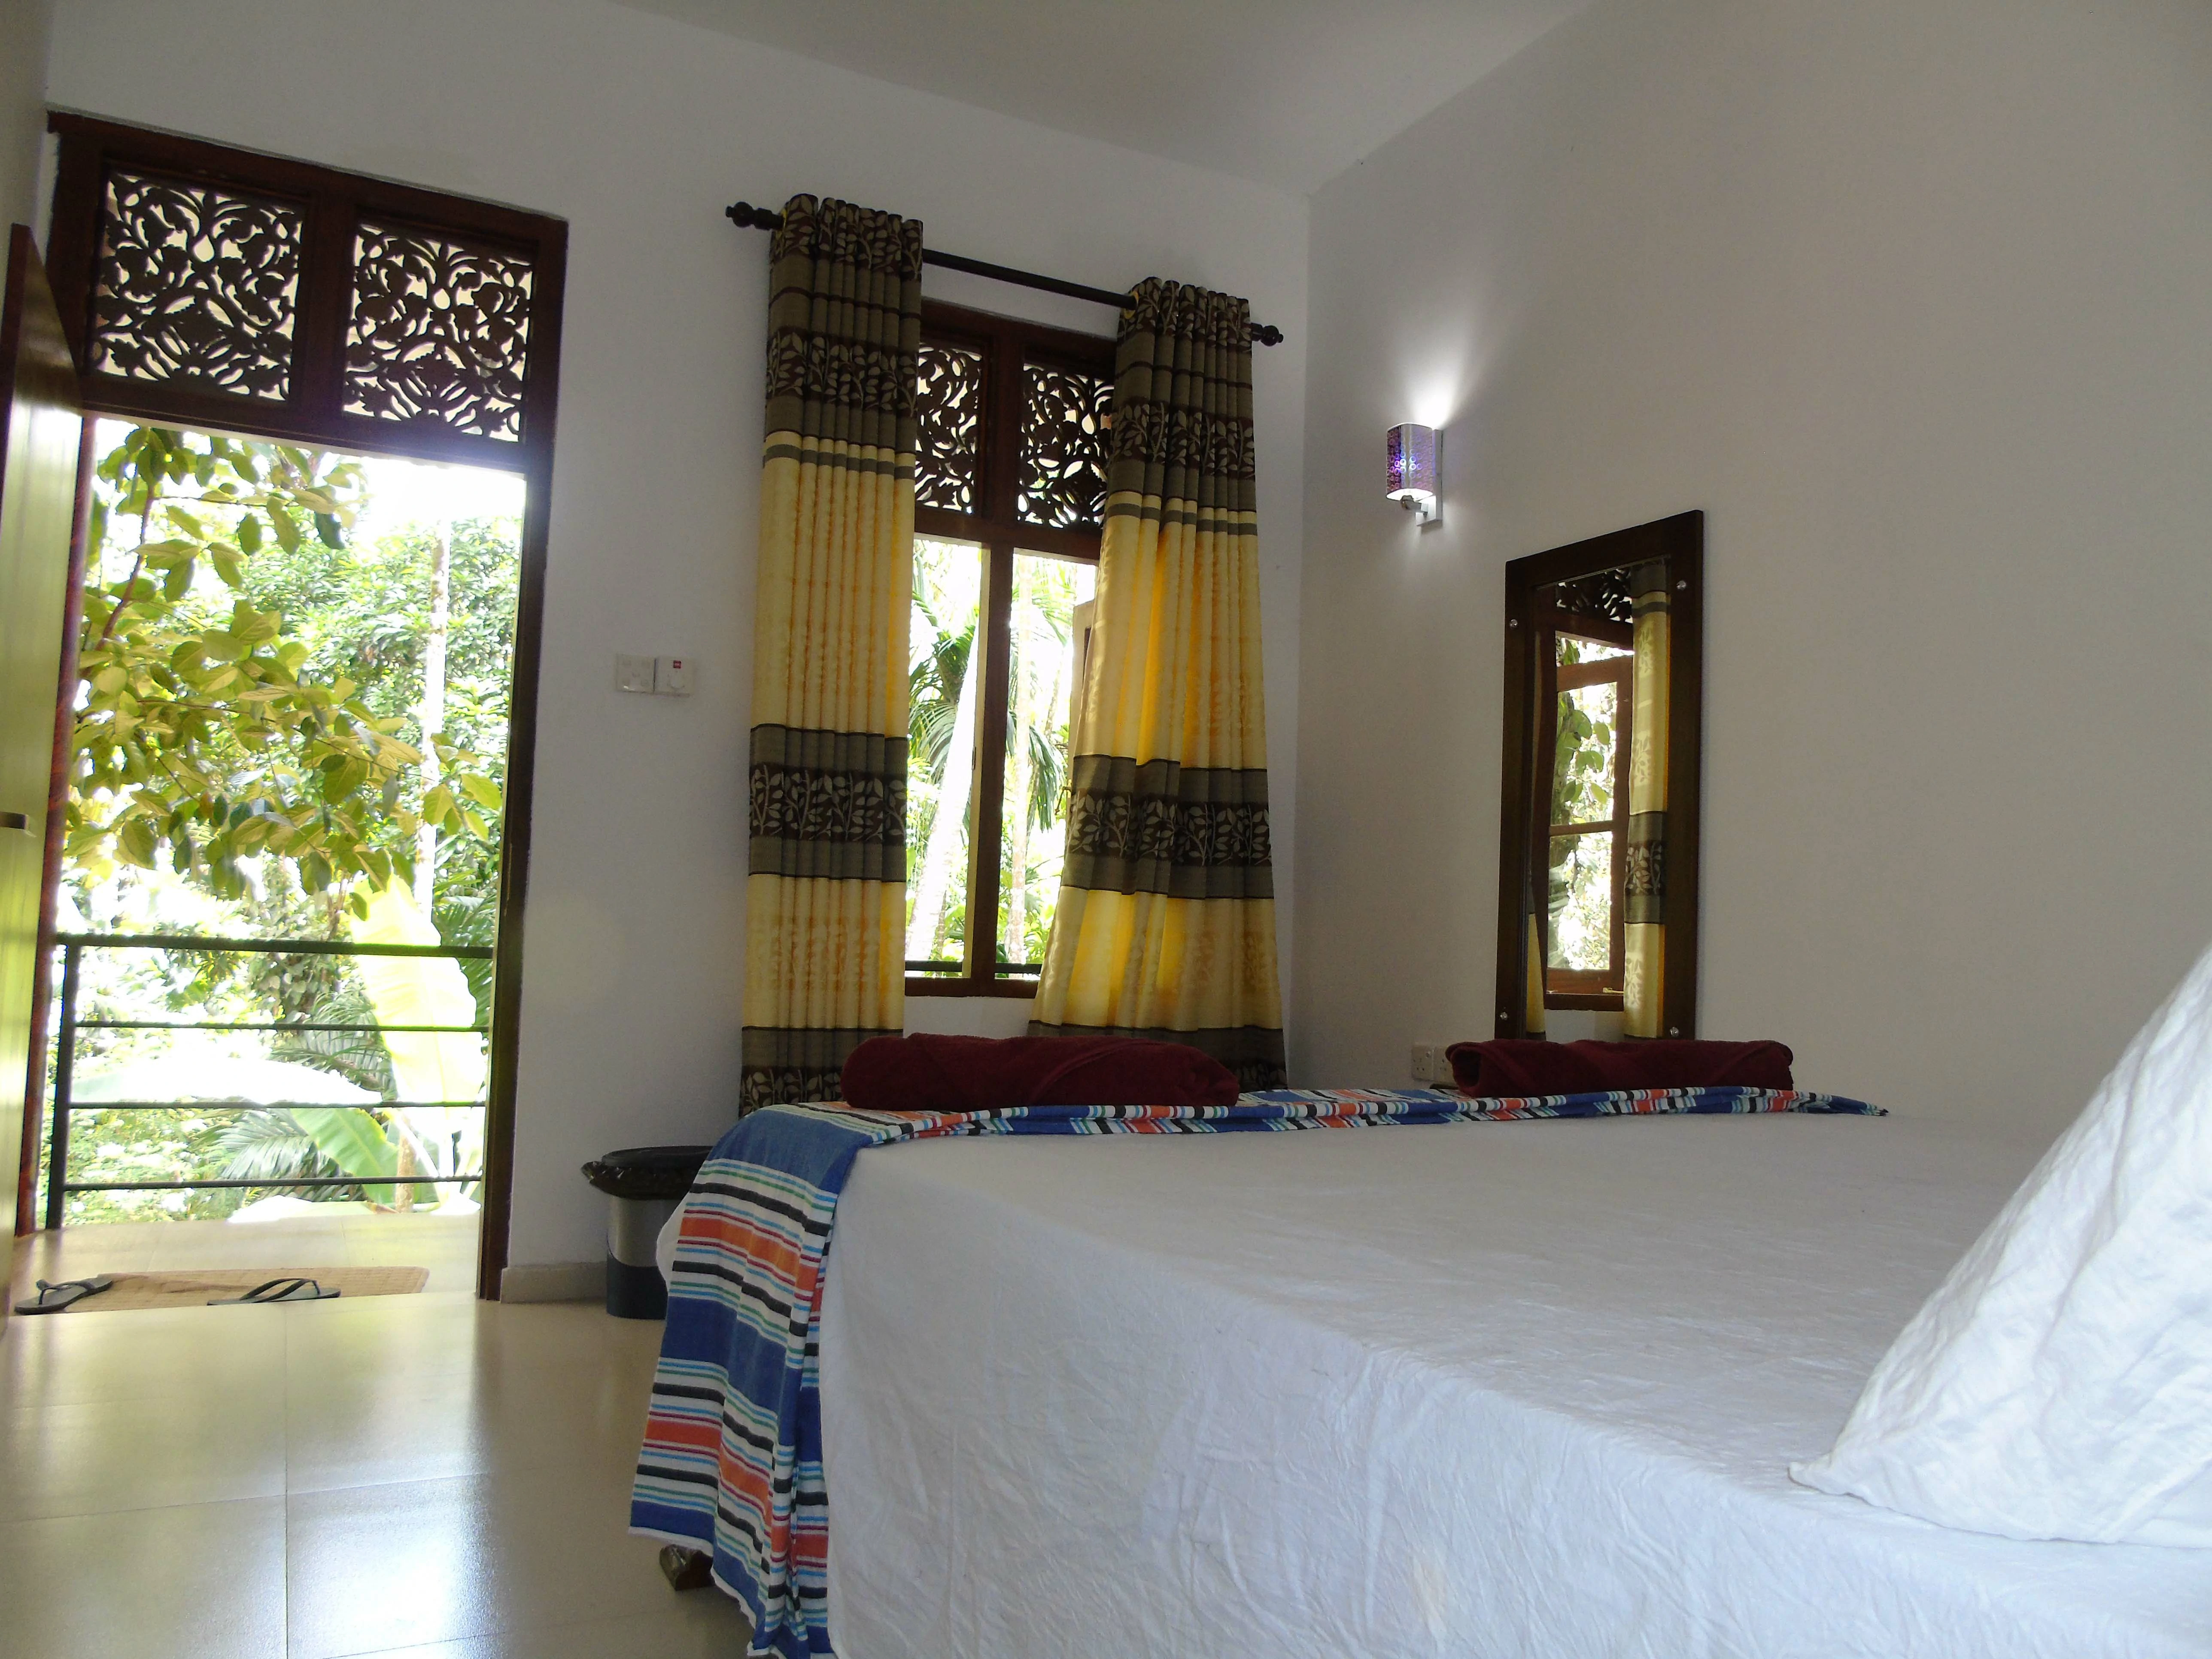 Deluxe-Double-Room-Sinharaja-Tour-Guide